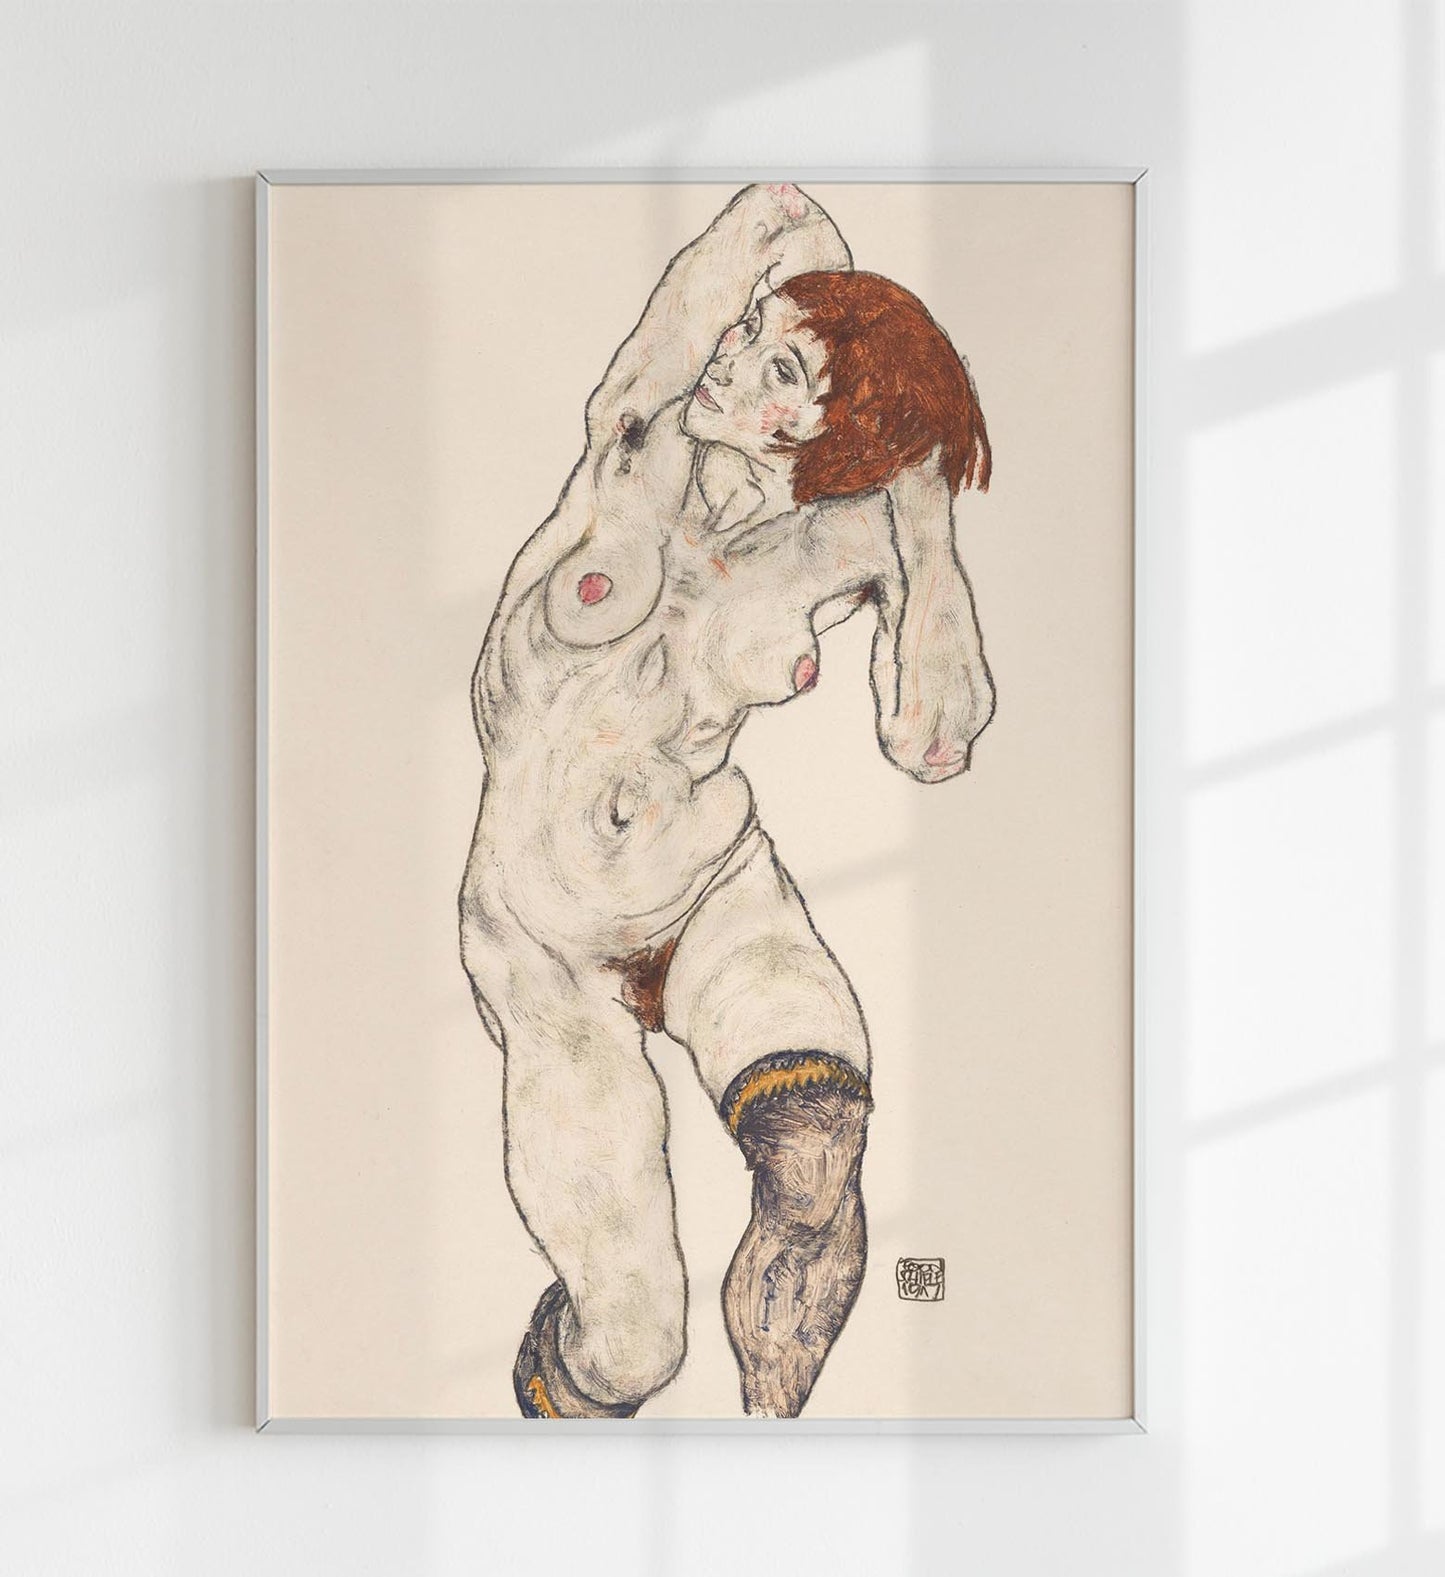 Nude in Black Stocking by Egon Schiele